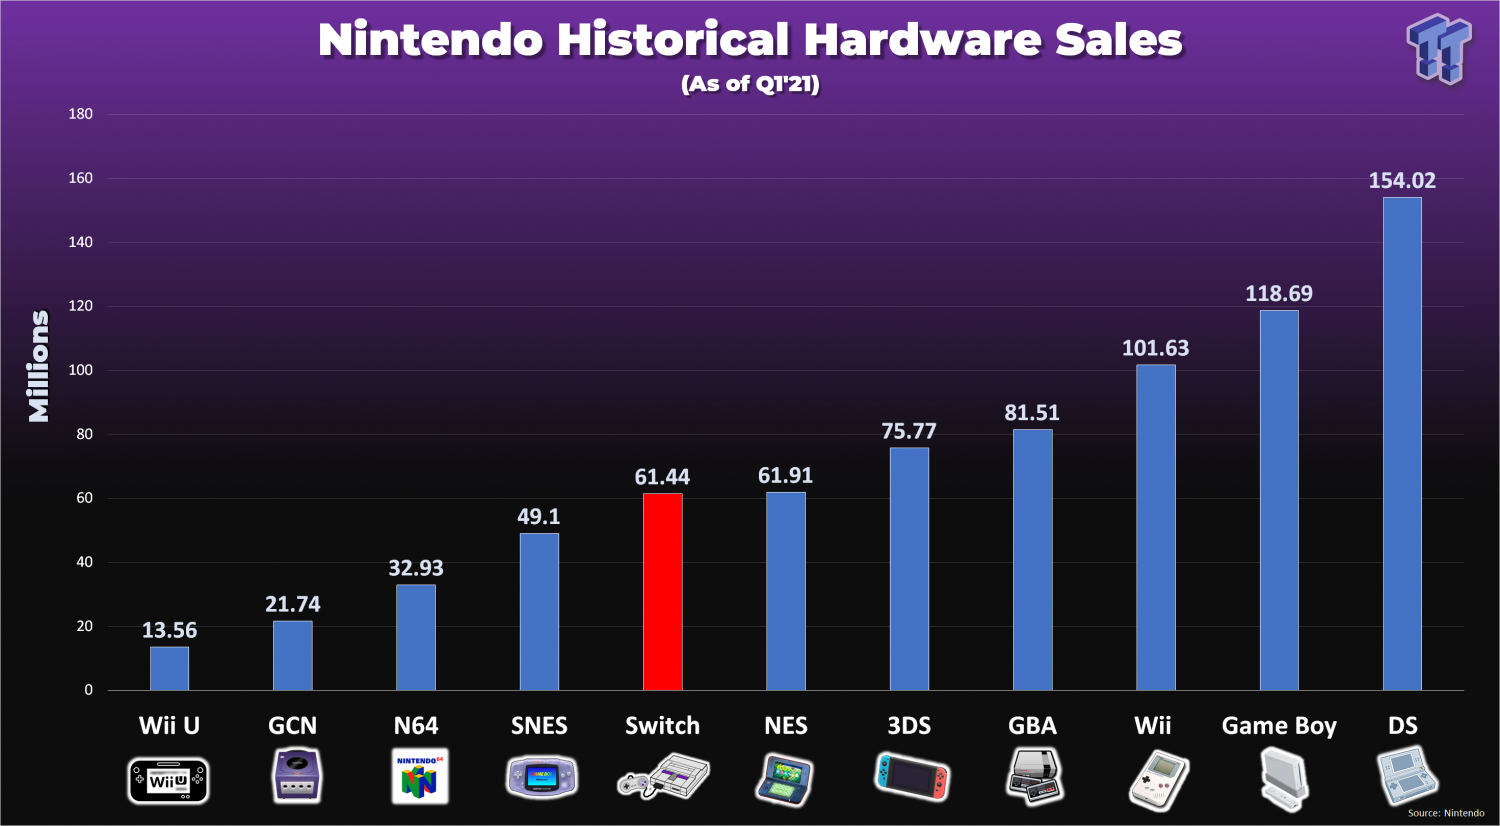 switch software sales